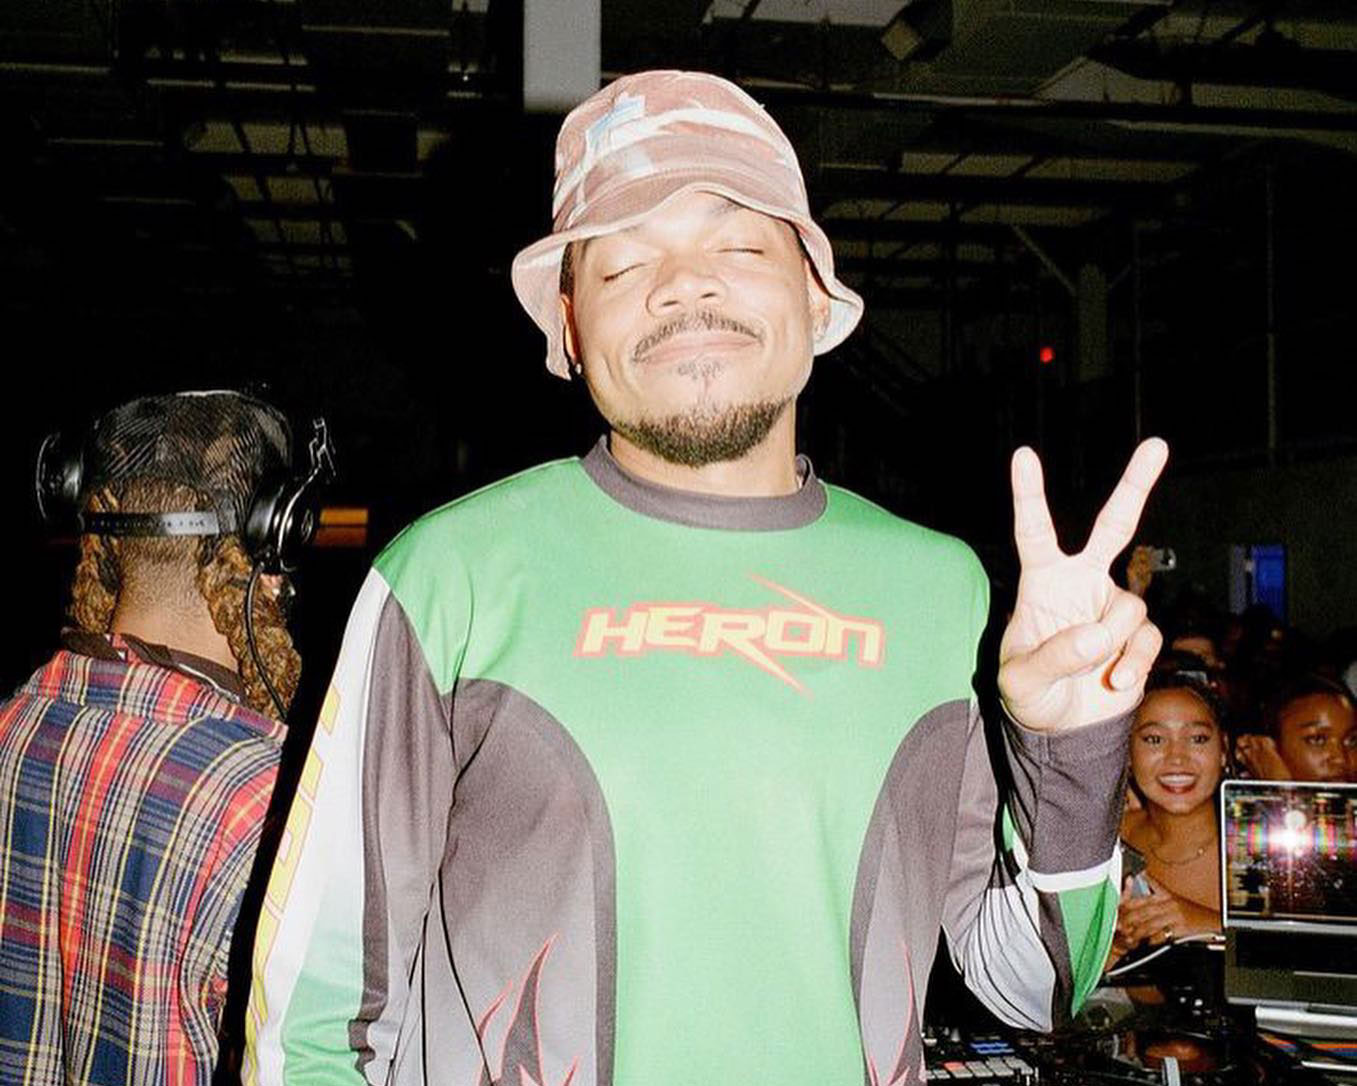 Chance the Rapper, who will be speaking at SXSW Sydney in 2023